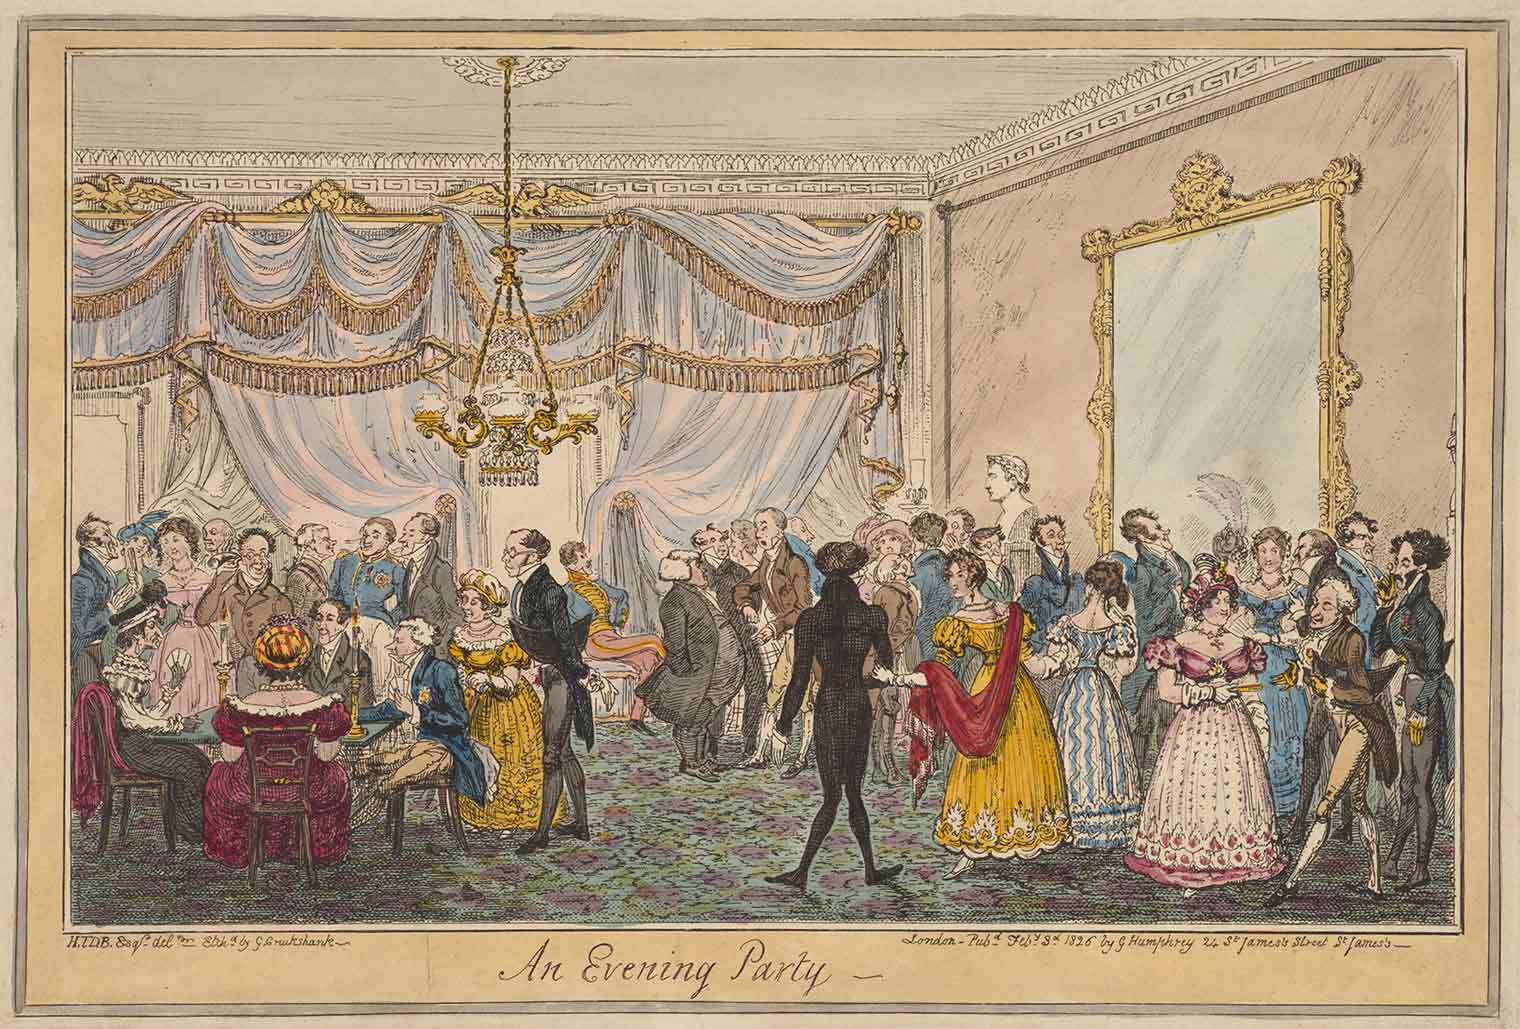 Colored drawing of a Georgian era party in a large, lavish room